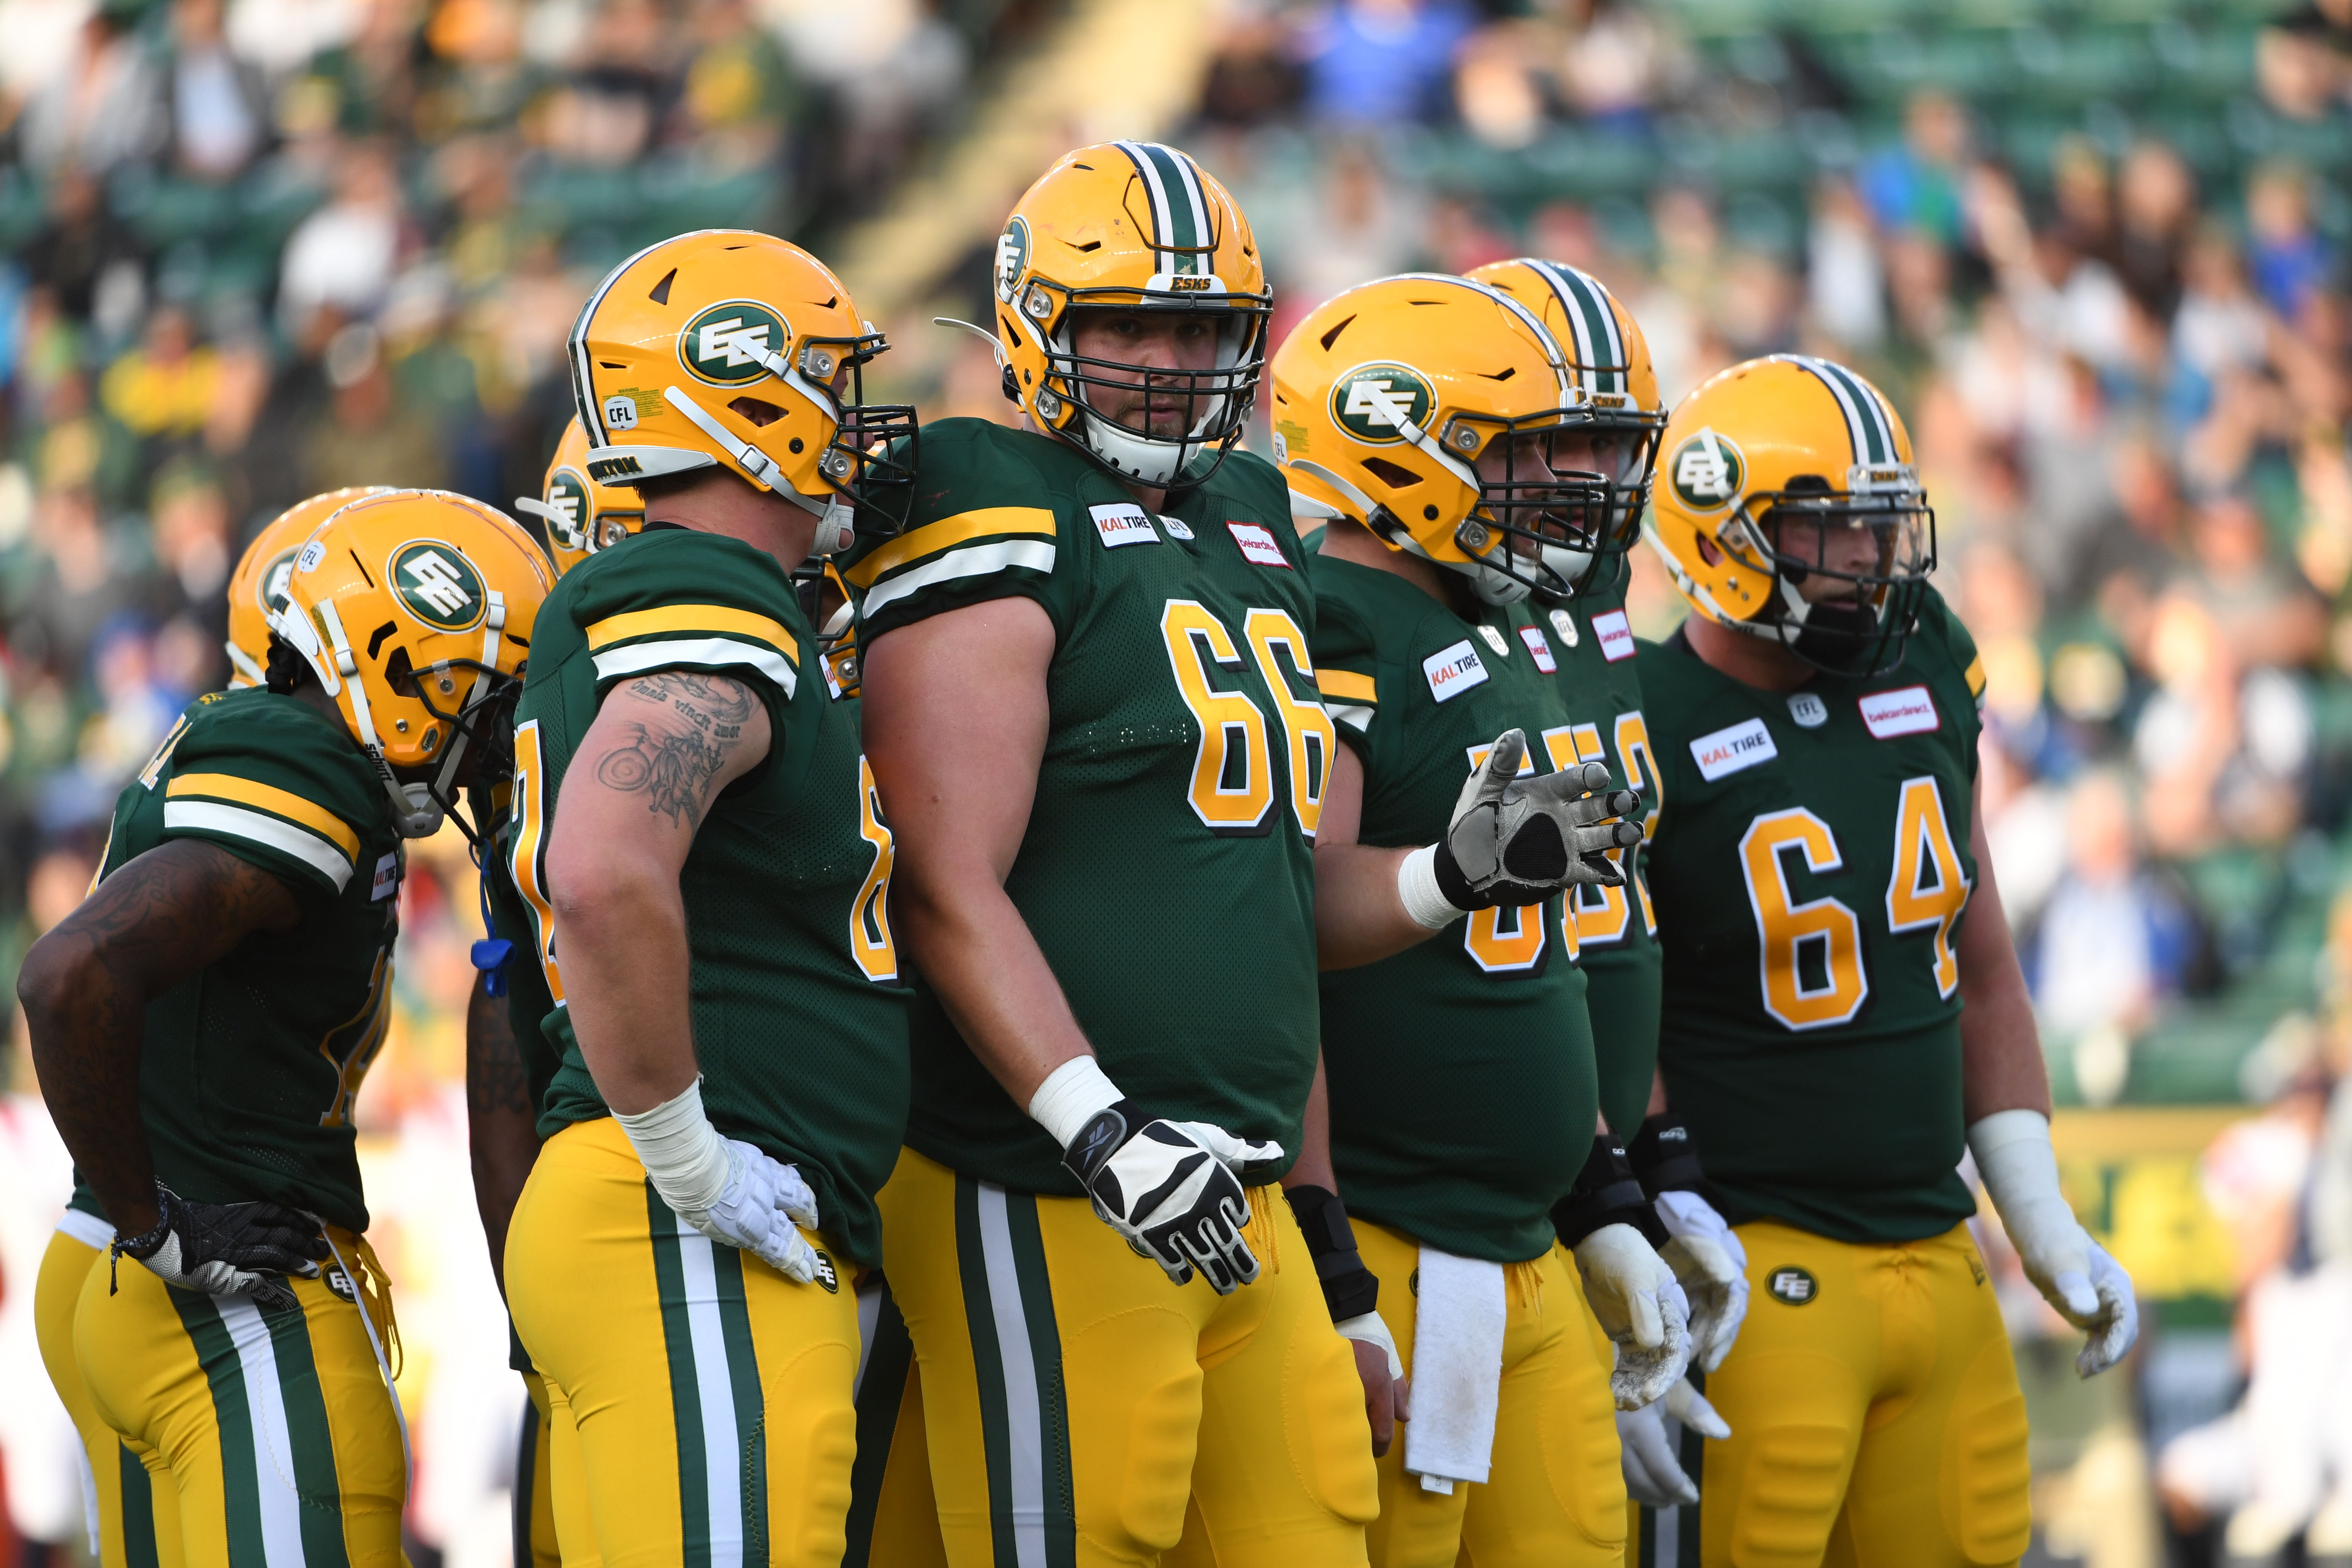 O'Donnell played a key role in Edmonton's 2015 Grey Cup win. Photo credit: Edmonton Elks..